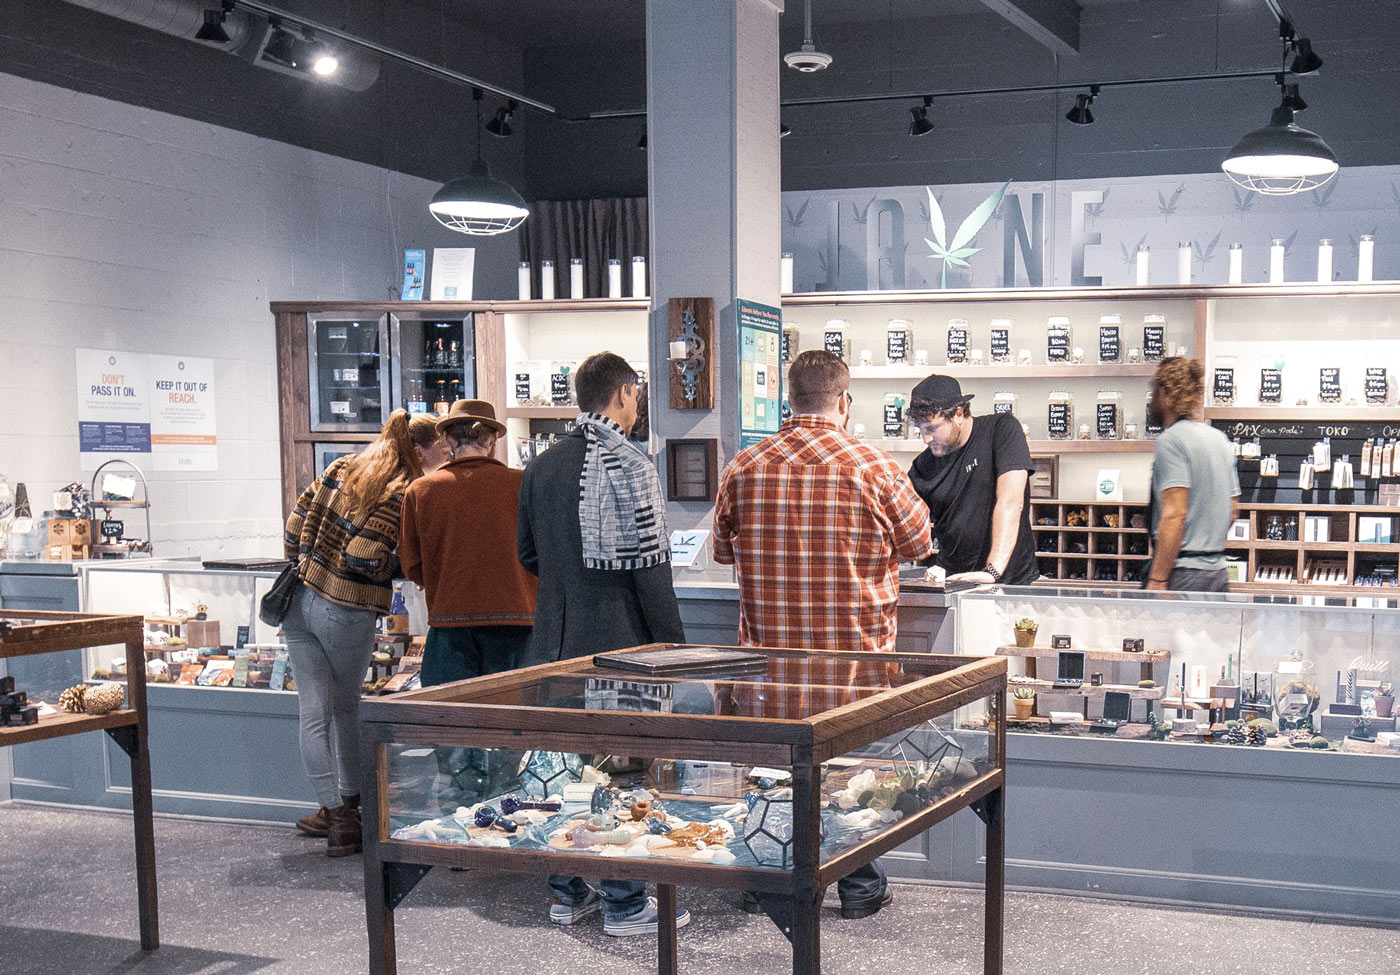 Customers browse cannabis products at Jayne dispensary